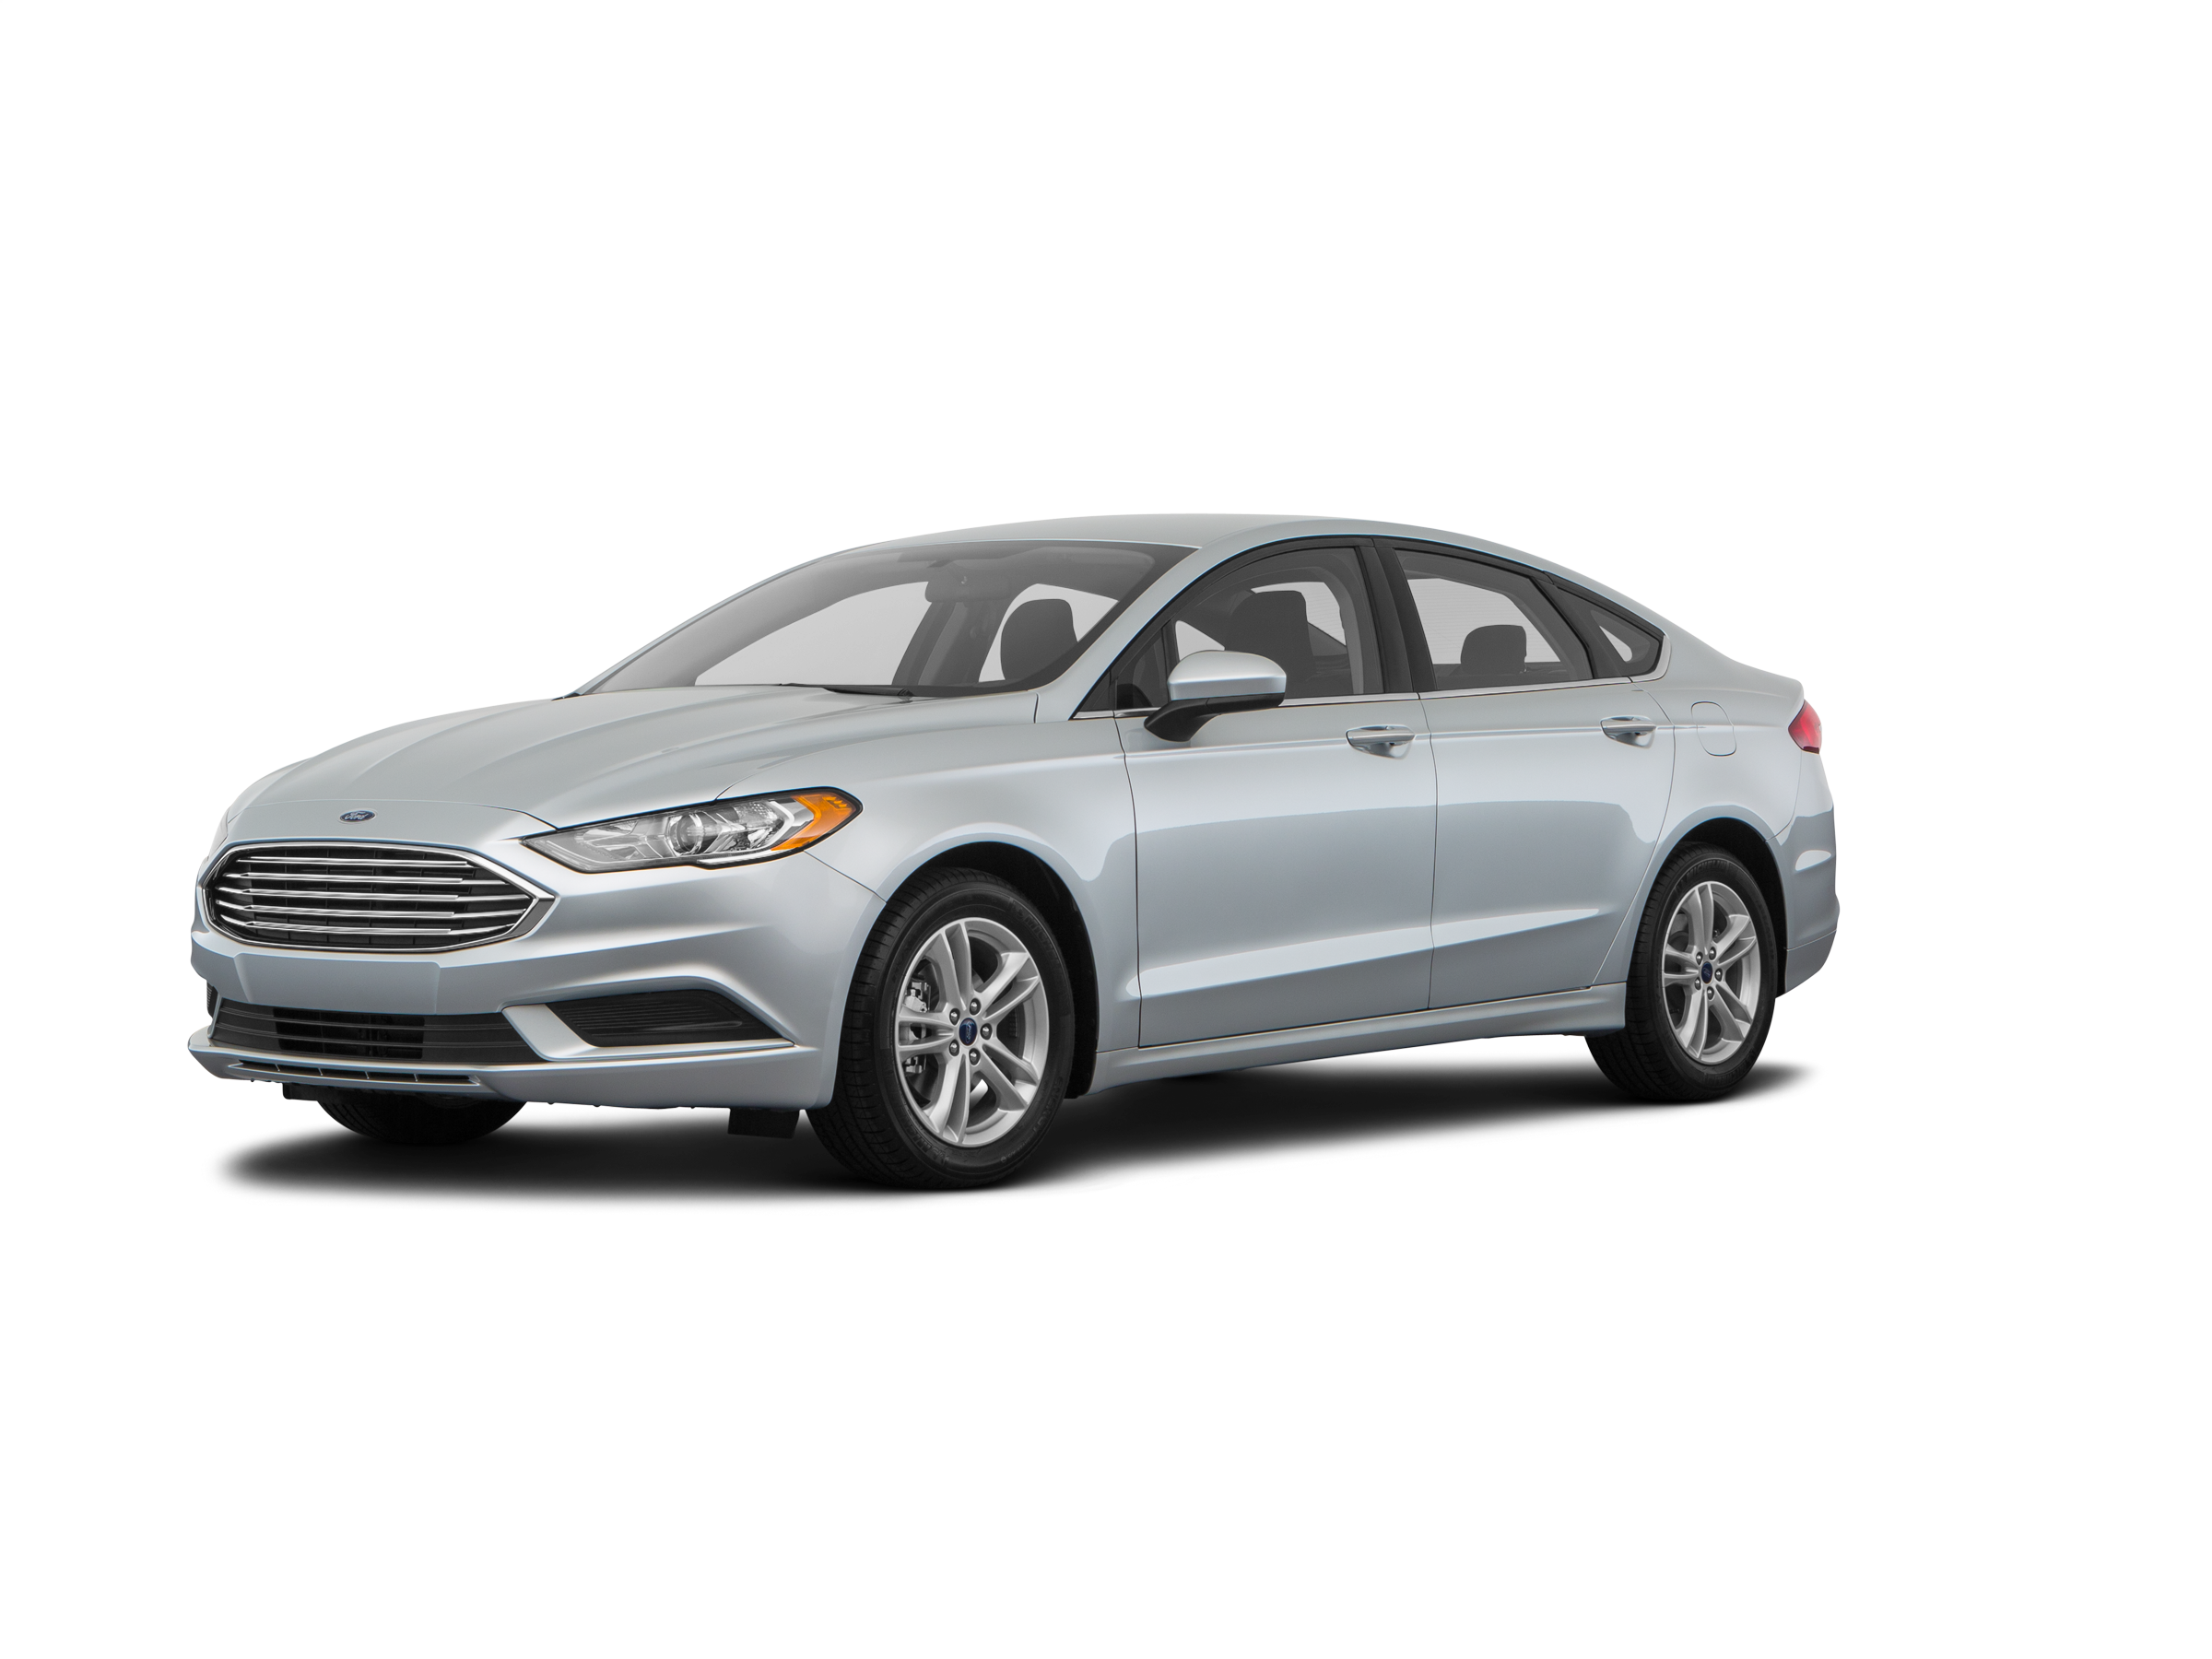 2018 Ford Fusion Price, Value, Ratings & Reviews